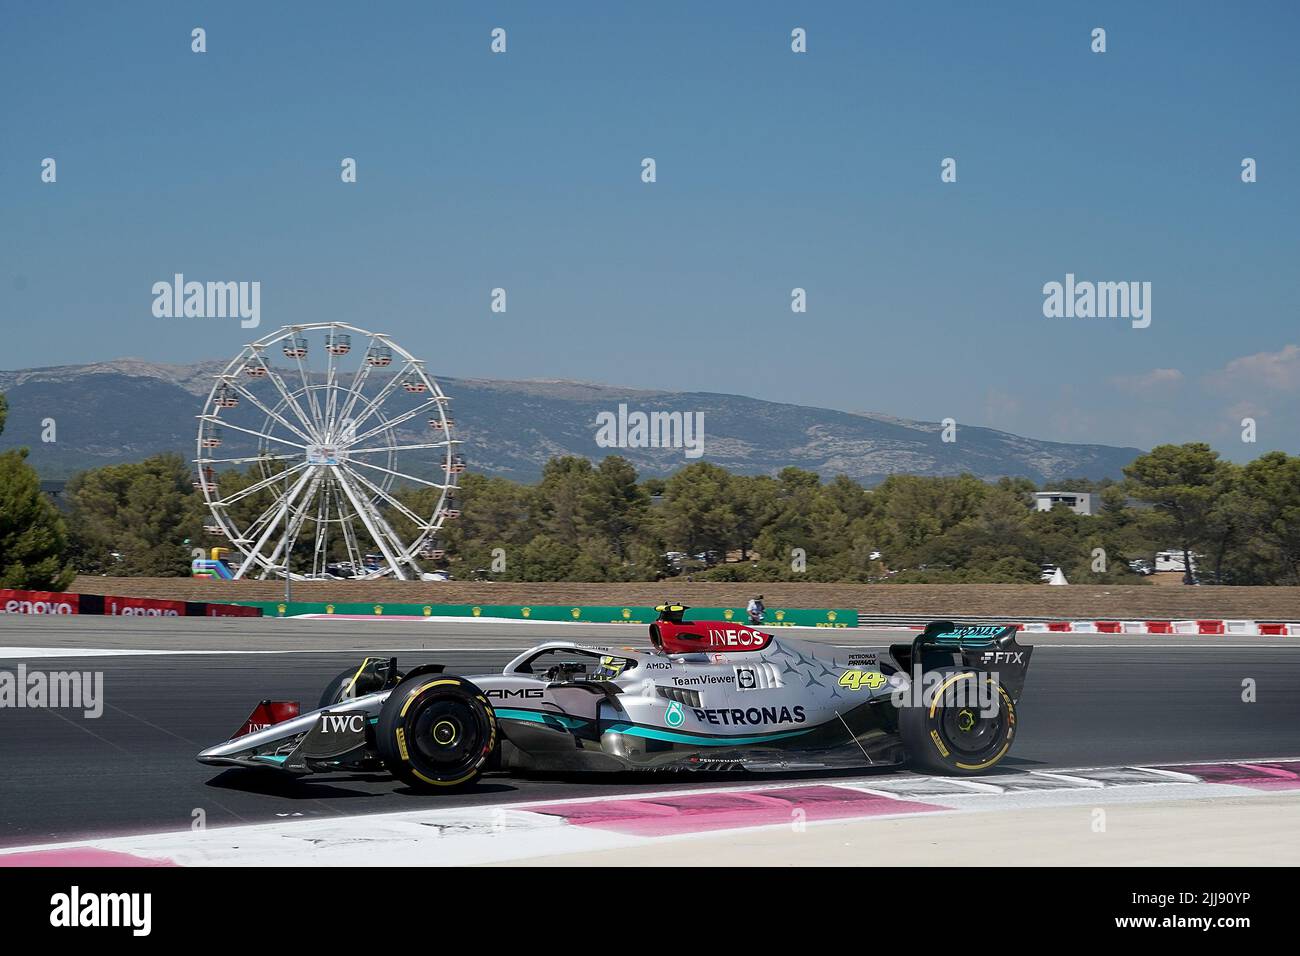 24 July 2022, France, Le Castellet: Motorsport: Formula 1 World Championship, French Grand Prix, race: Lewis Hamilton from Great Britain of Team Mercedes drives on the track. Photo: Hasan Bratic/dpa Stock Photo